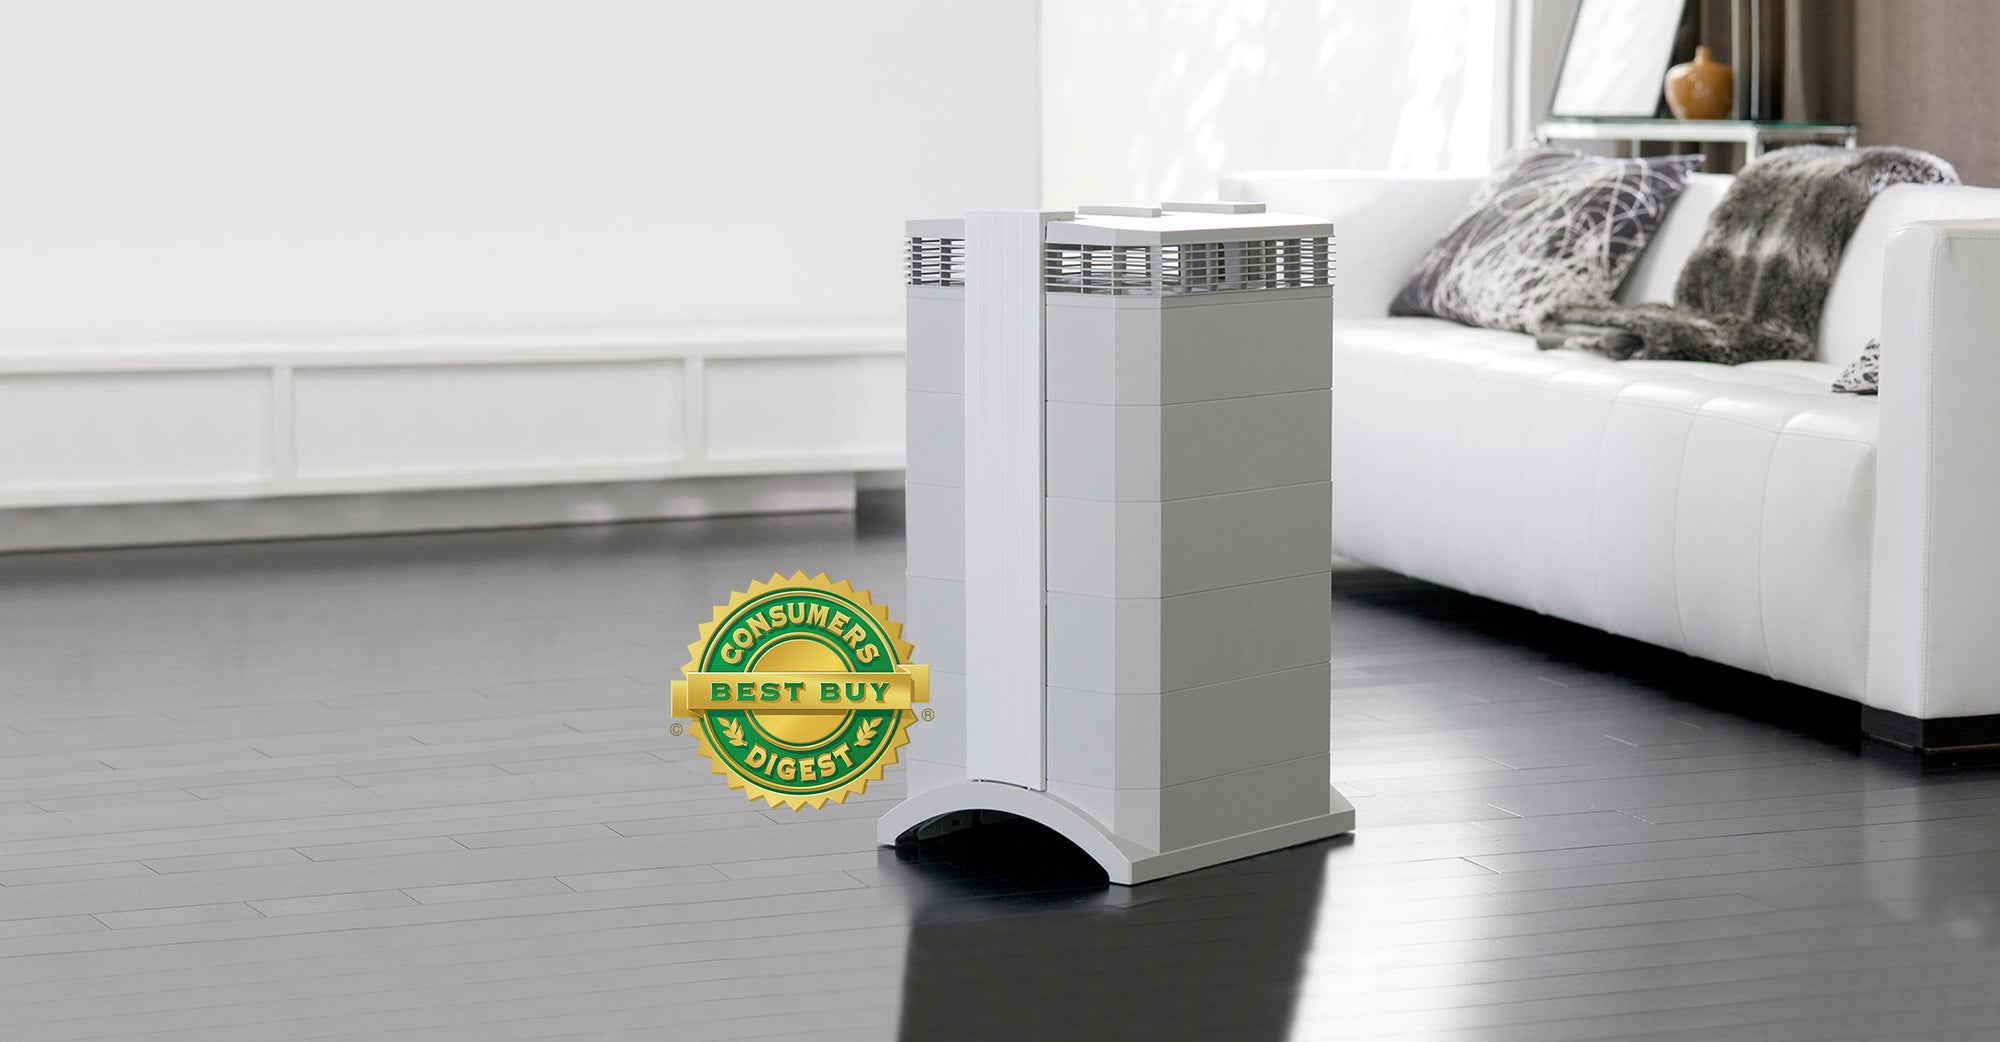 IQAir wins top rated air purifier award – for the 5th time